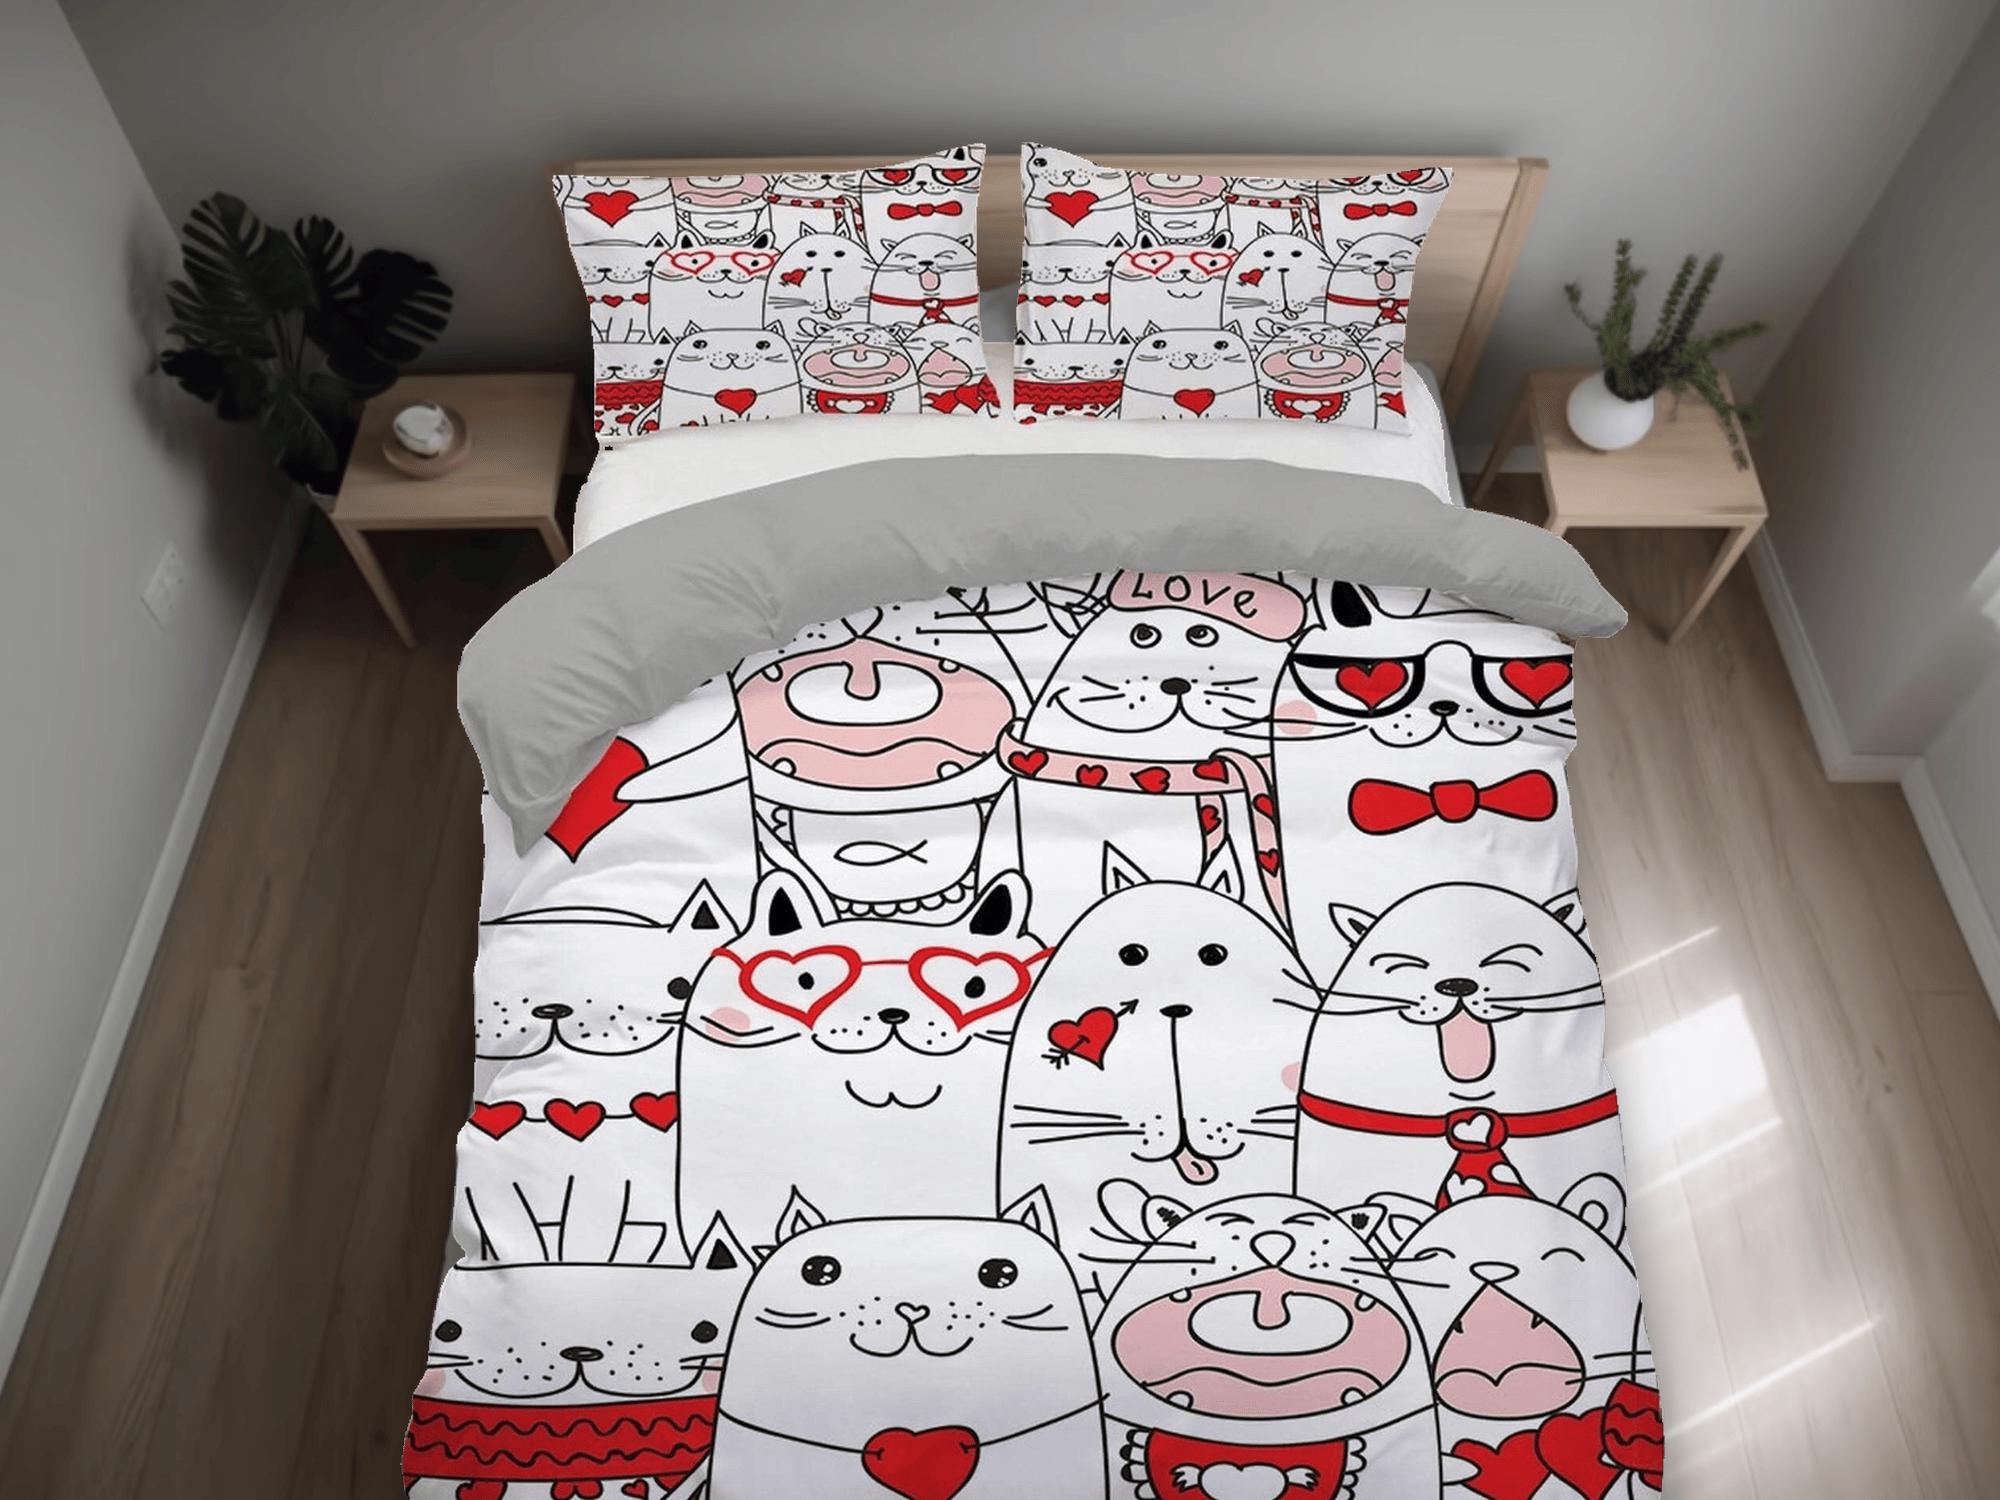 daintyduvet Cute white cat bedding with red accents, toddler bedding, kids duvet cover set, gift for cat lovers, baby bedding, baby shower gift